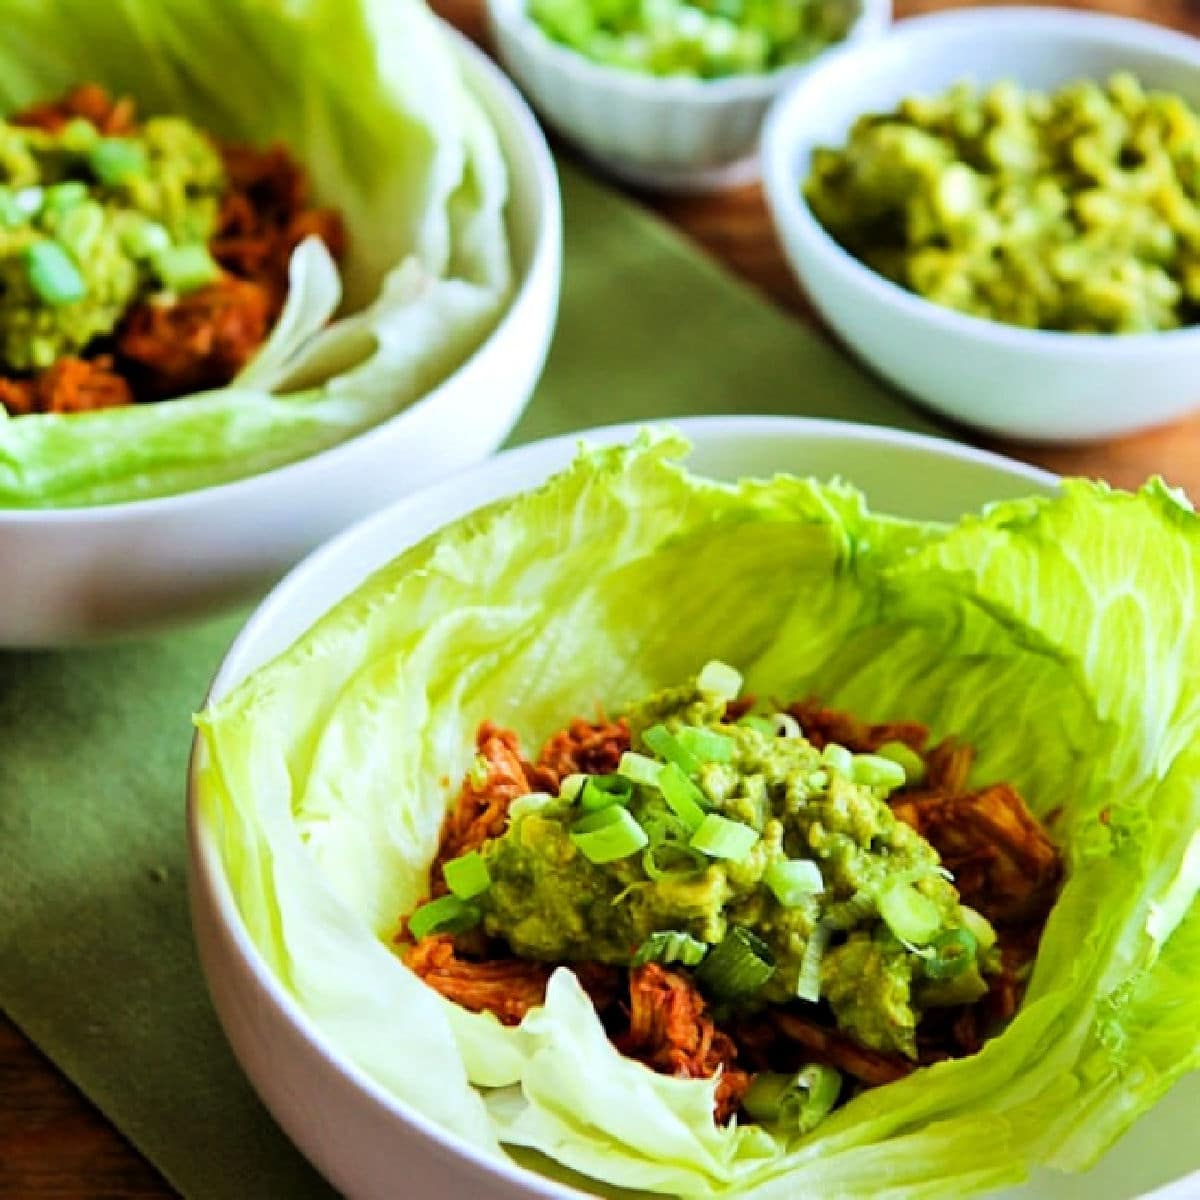 Square image of Slow Cooker Barbecue Chicken shown in lettuce cups.